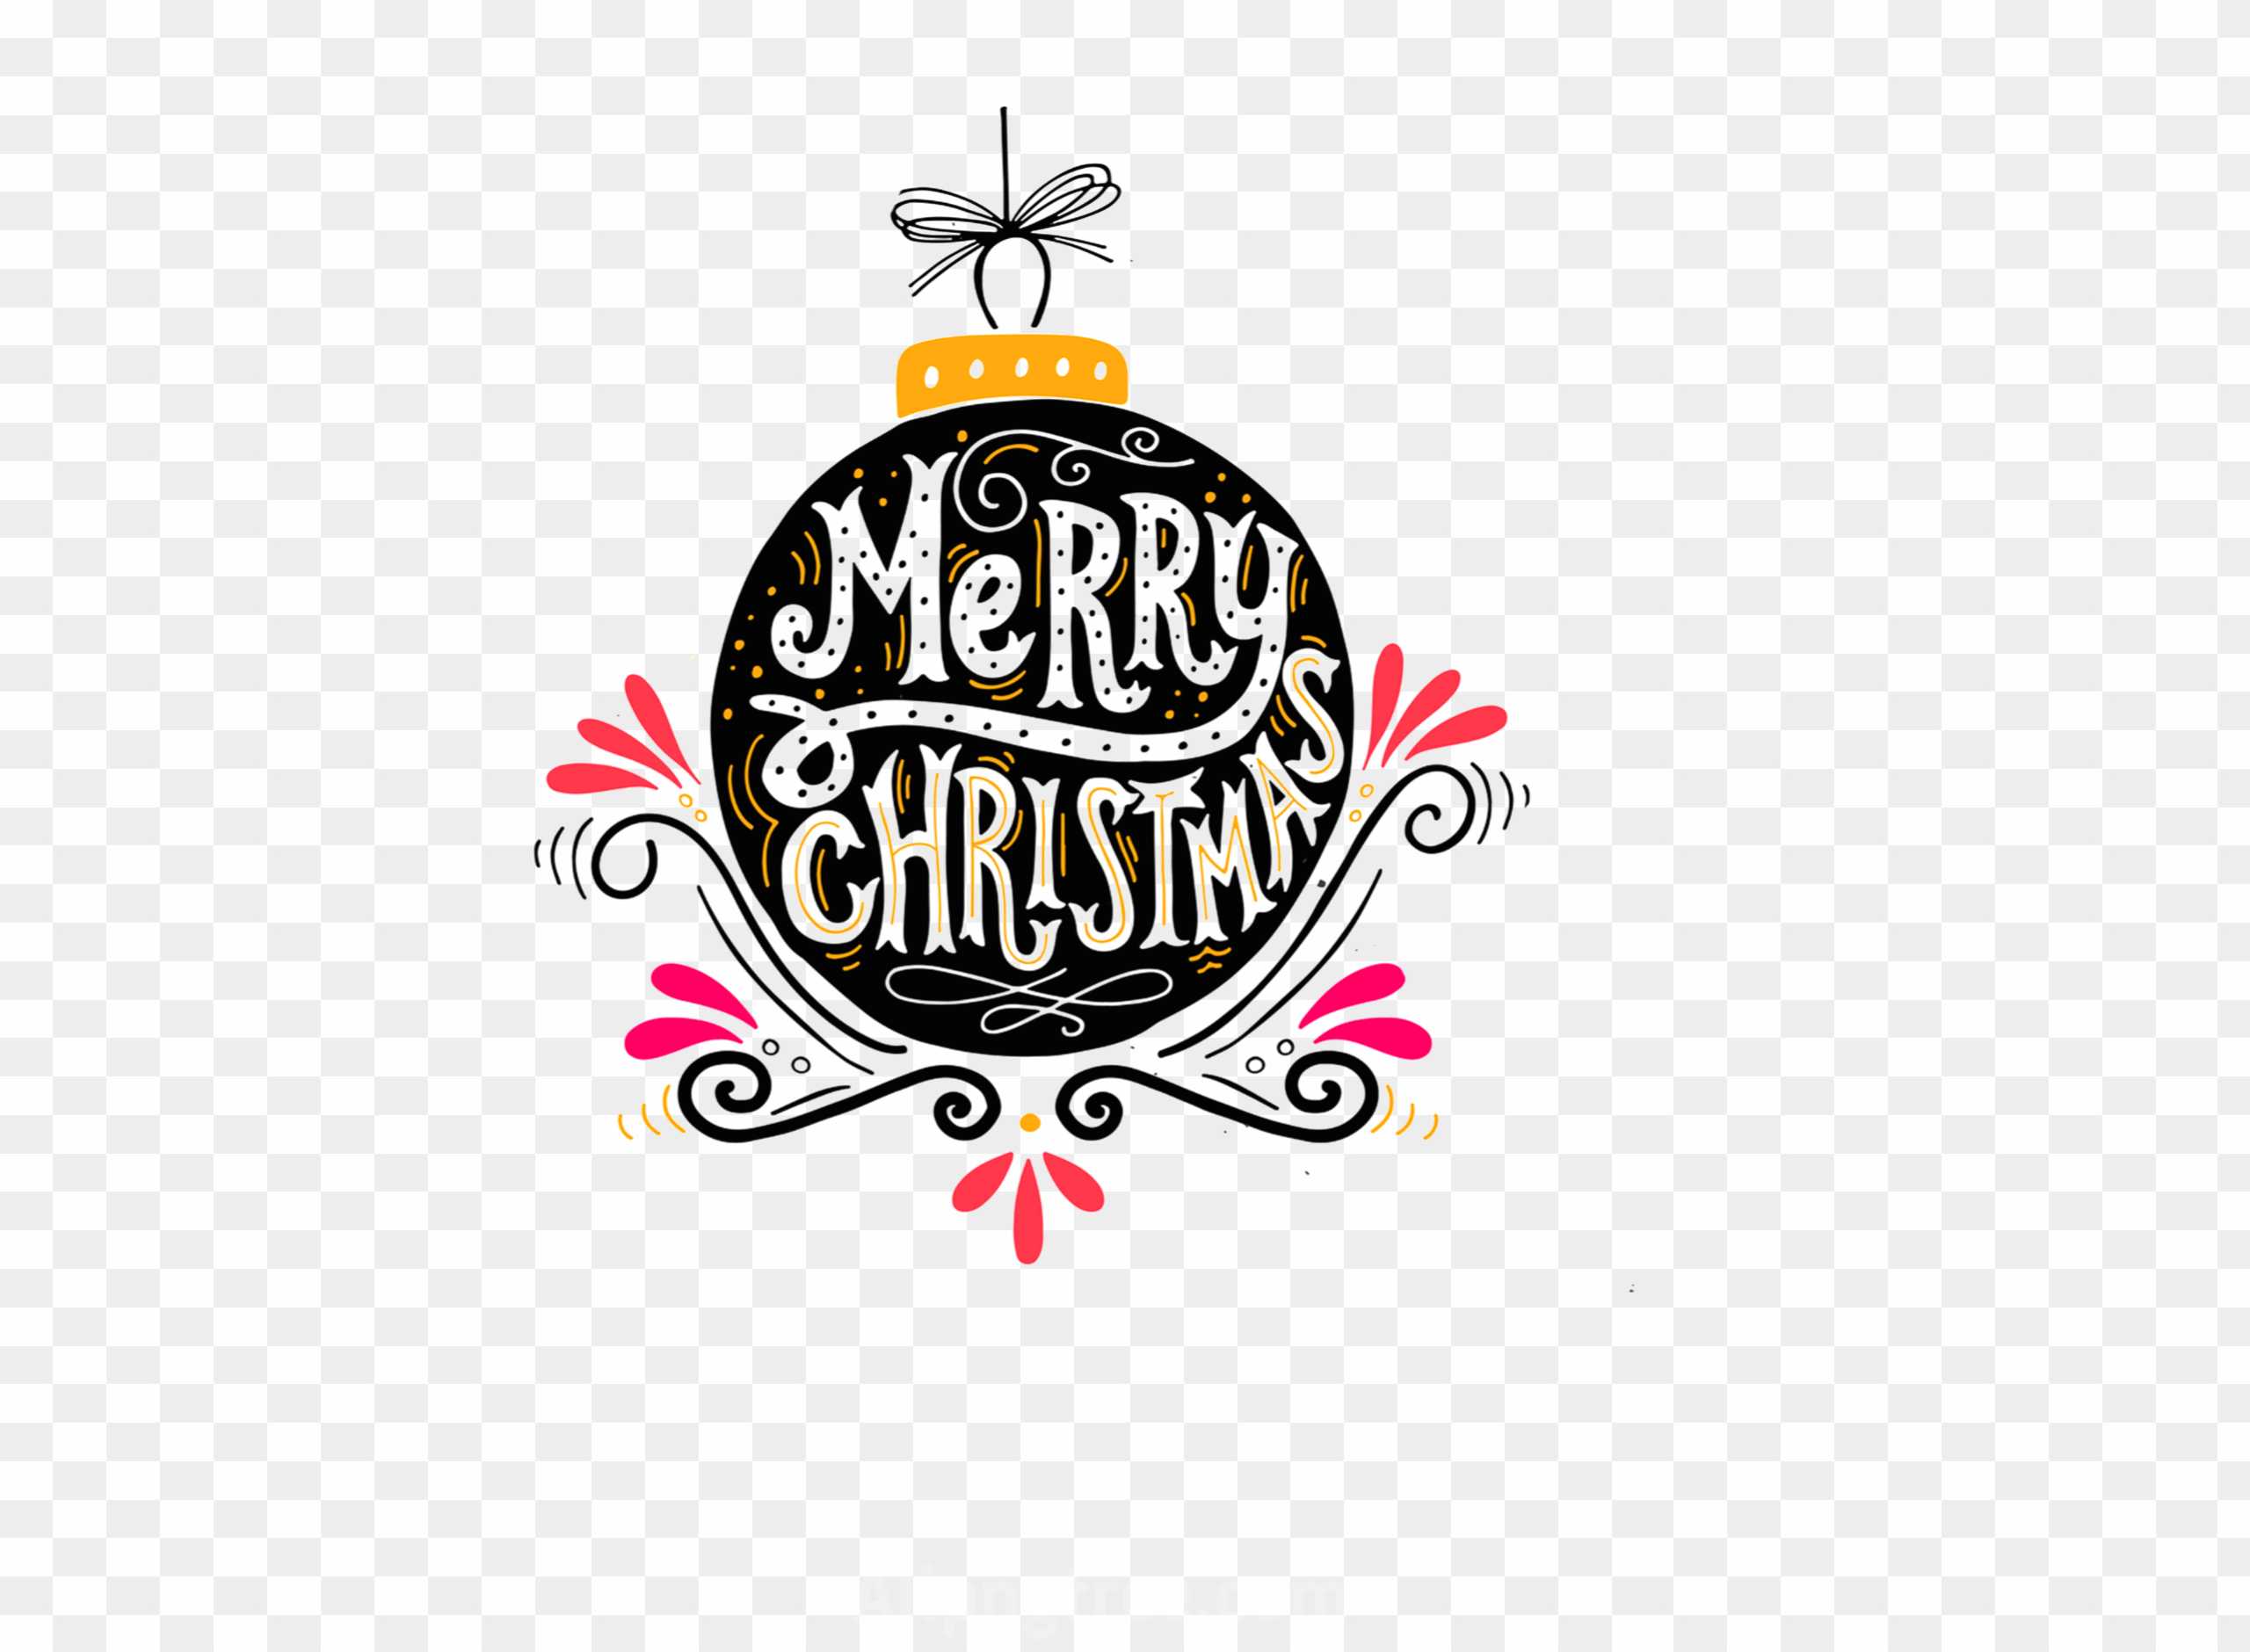 Merry christmas png images